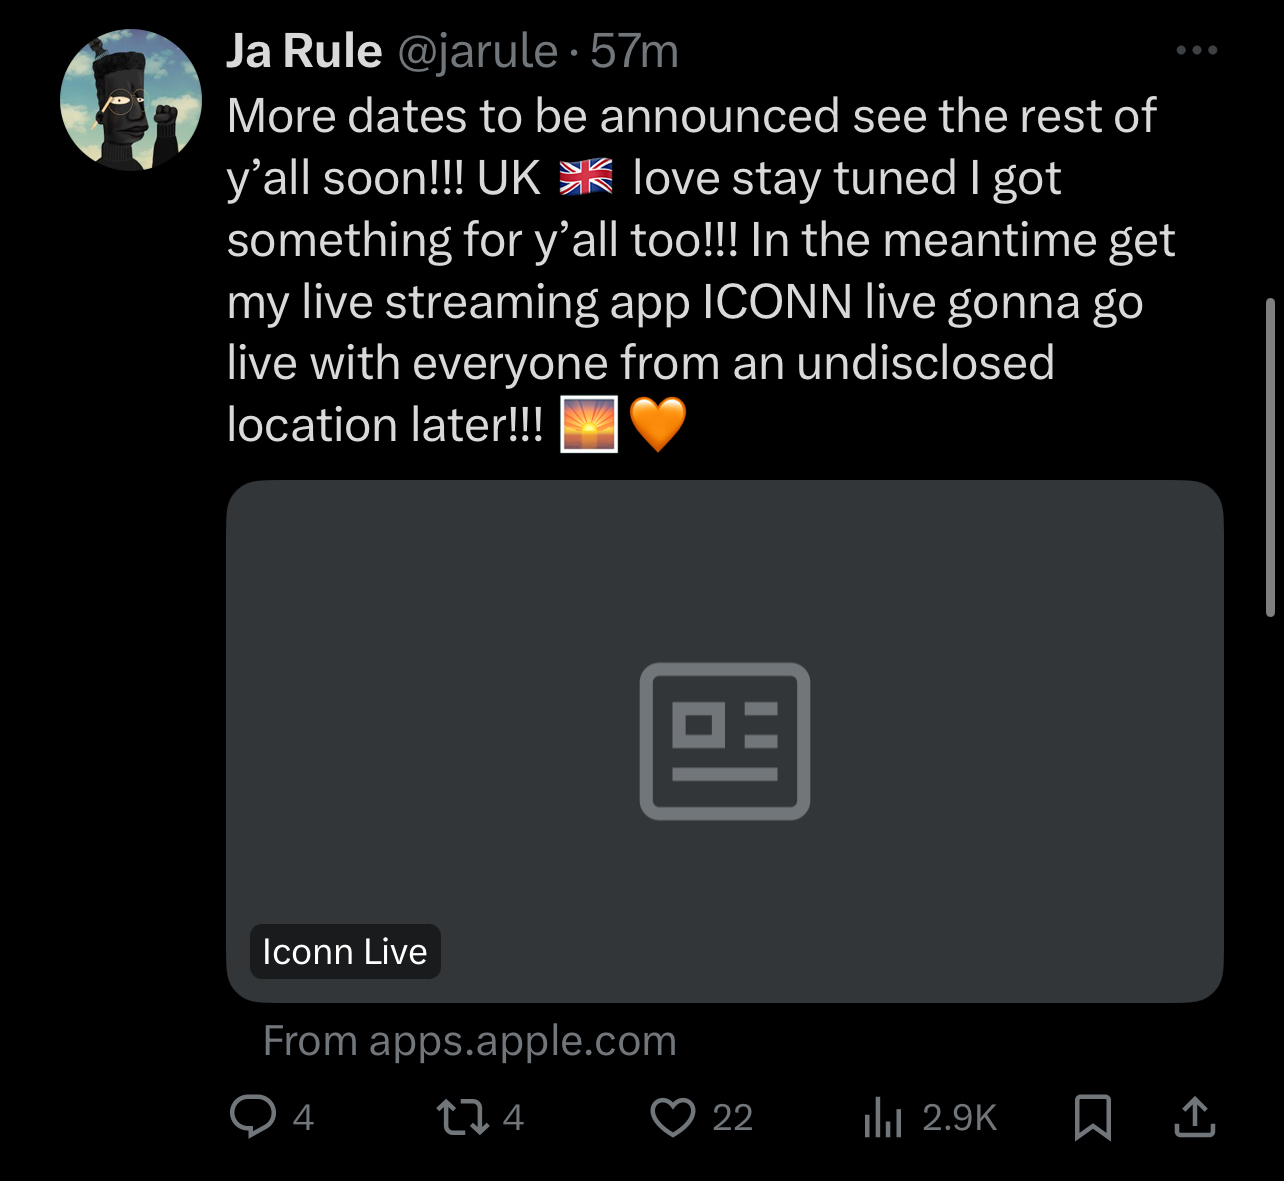 Post by Ja Rule promoting an upcoming live event on Iconn Live, teasing a special location. He encourages UK fans to stay tuned